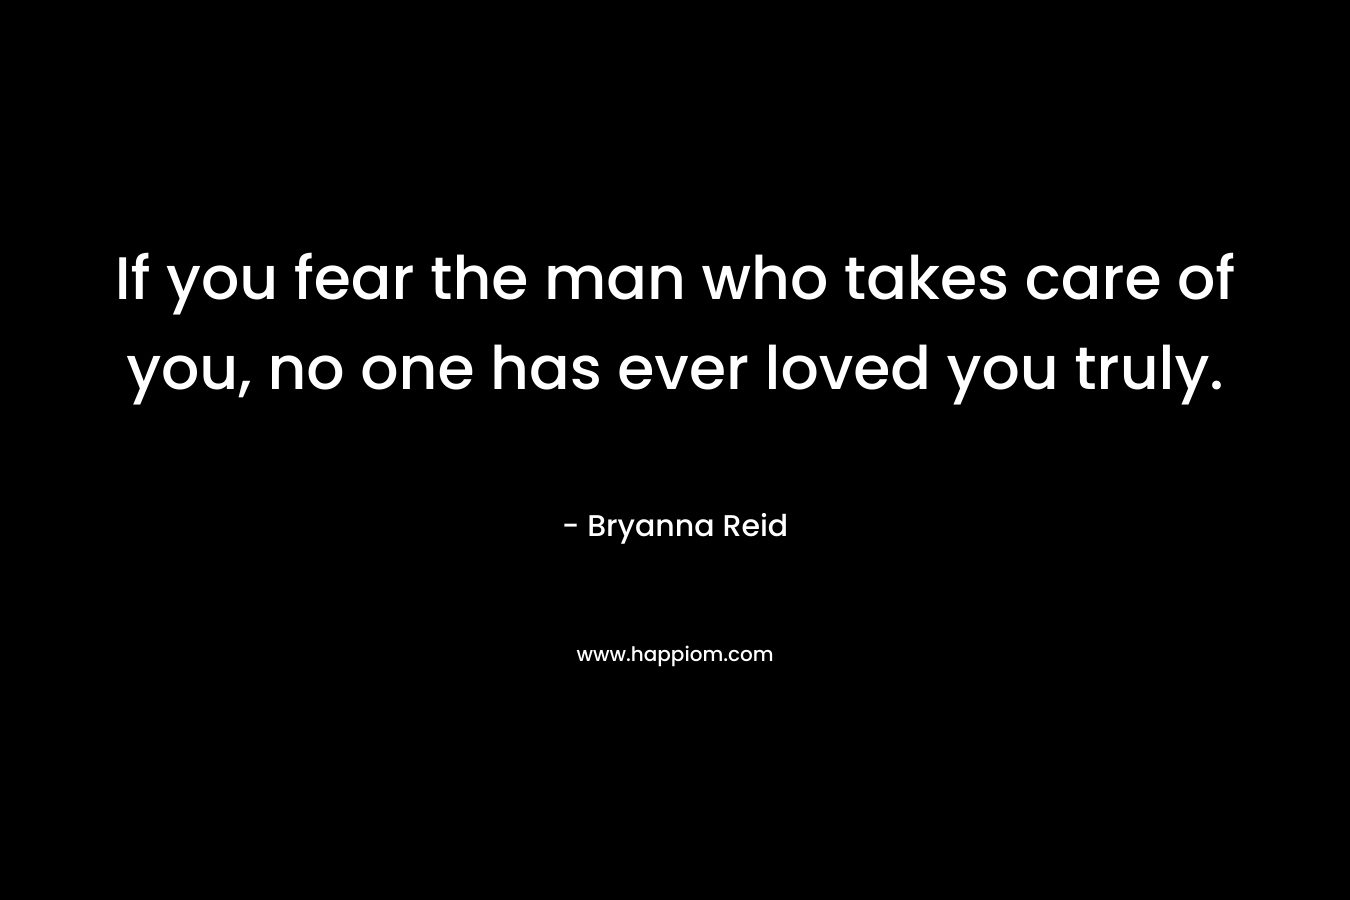 If you fear the man who takes care of you, no one has ever loved you truly.